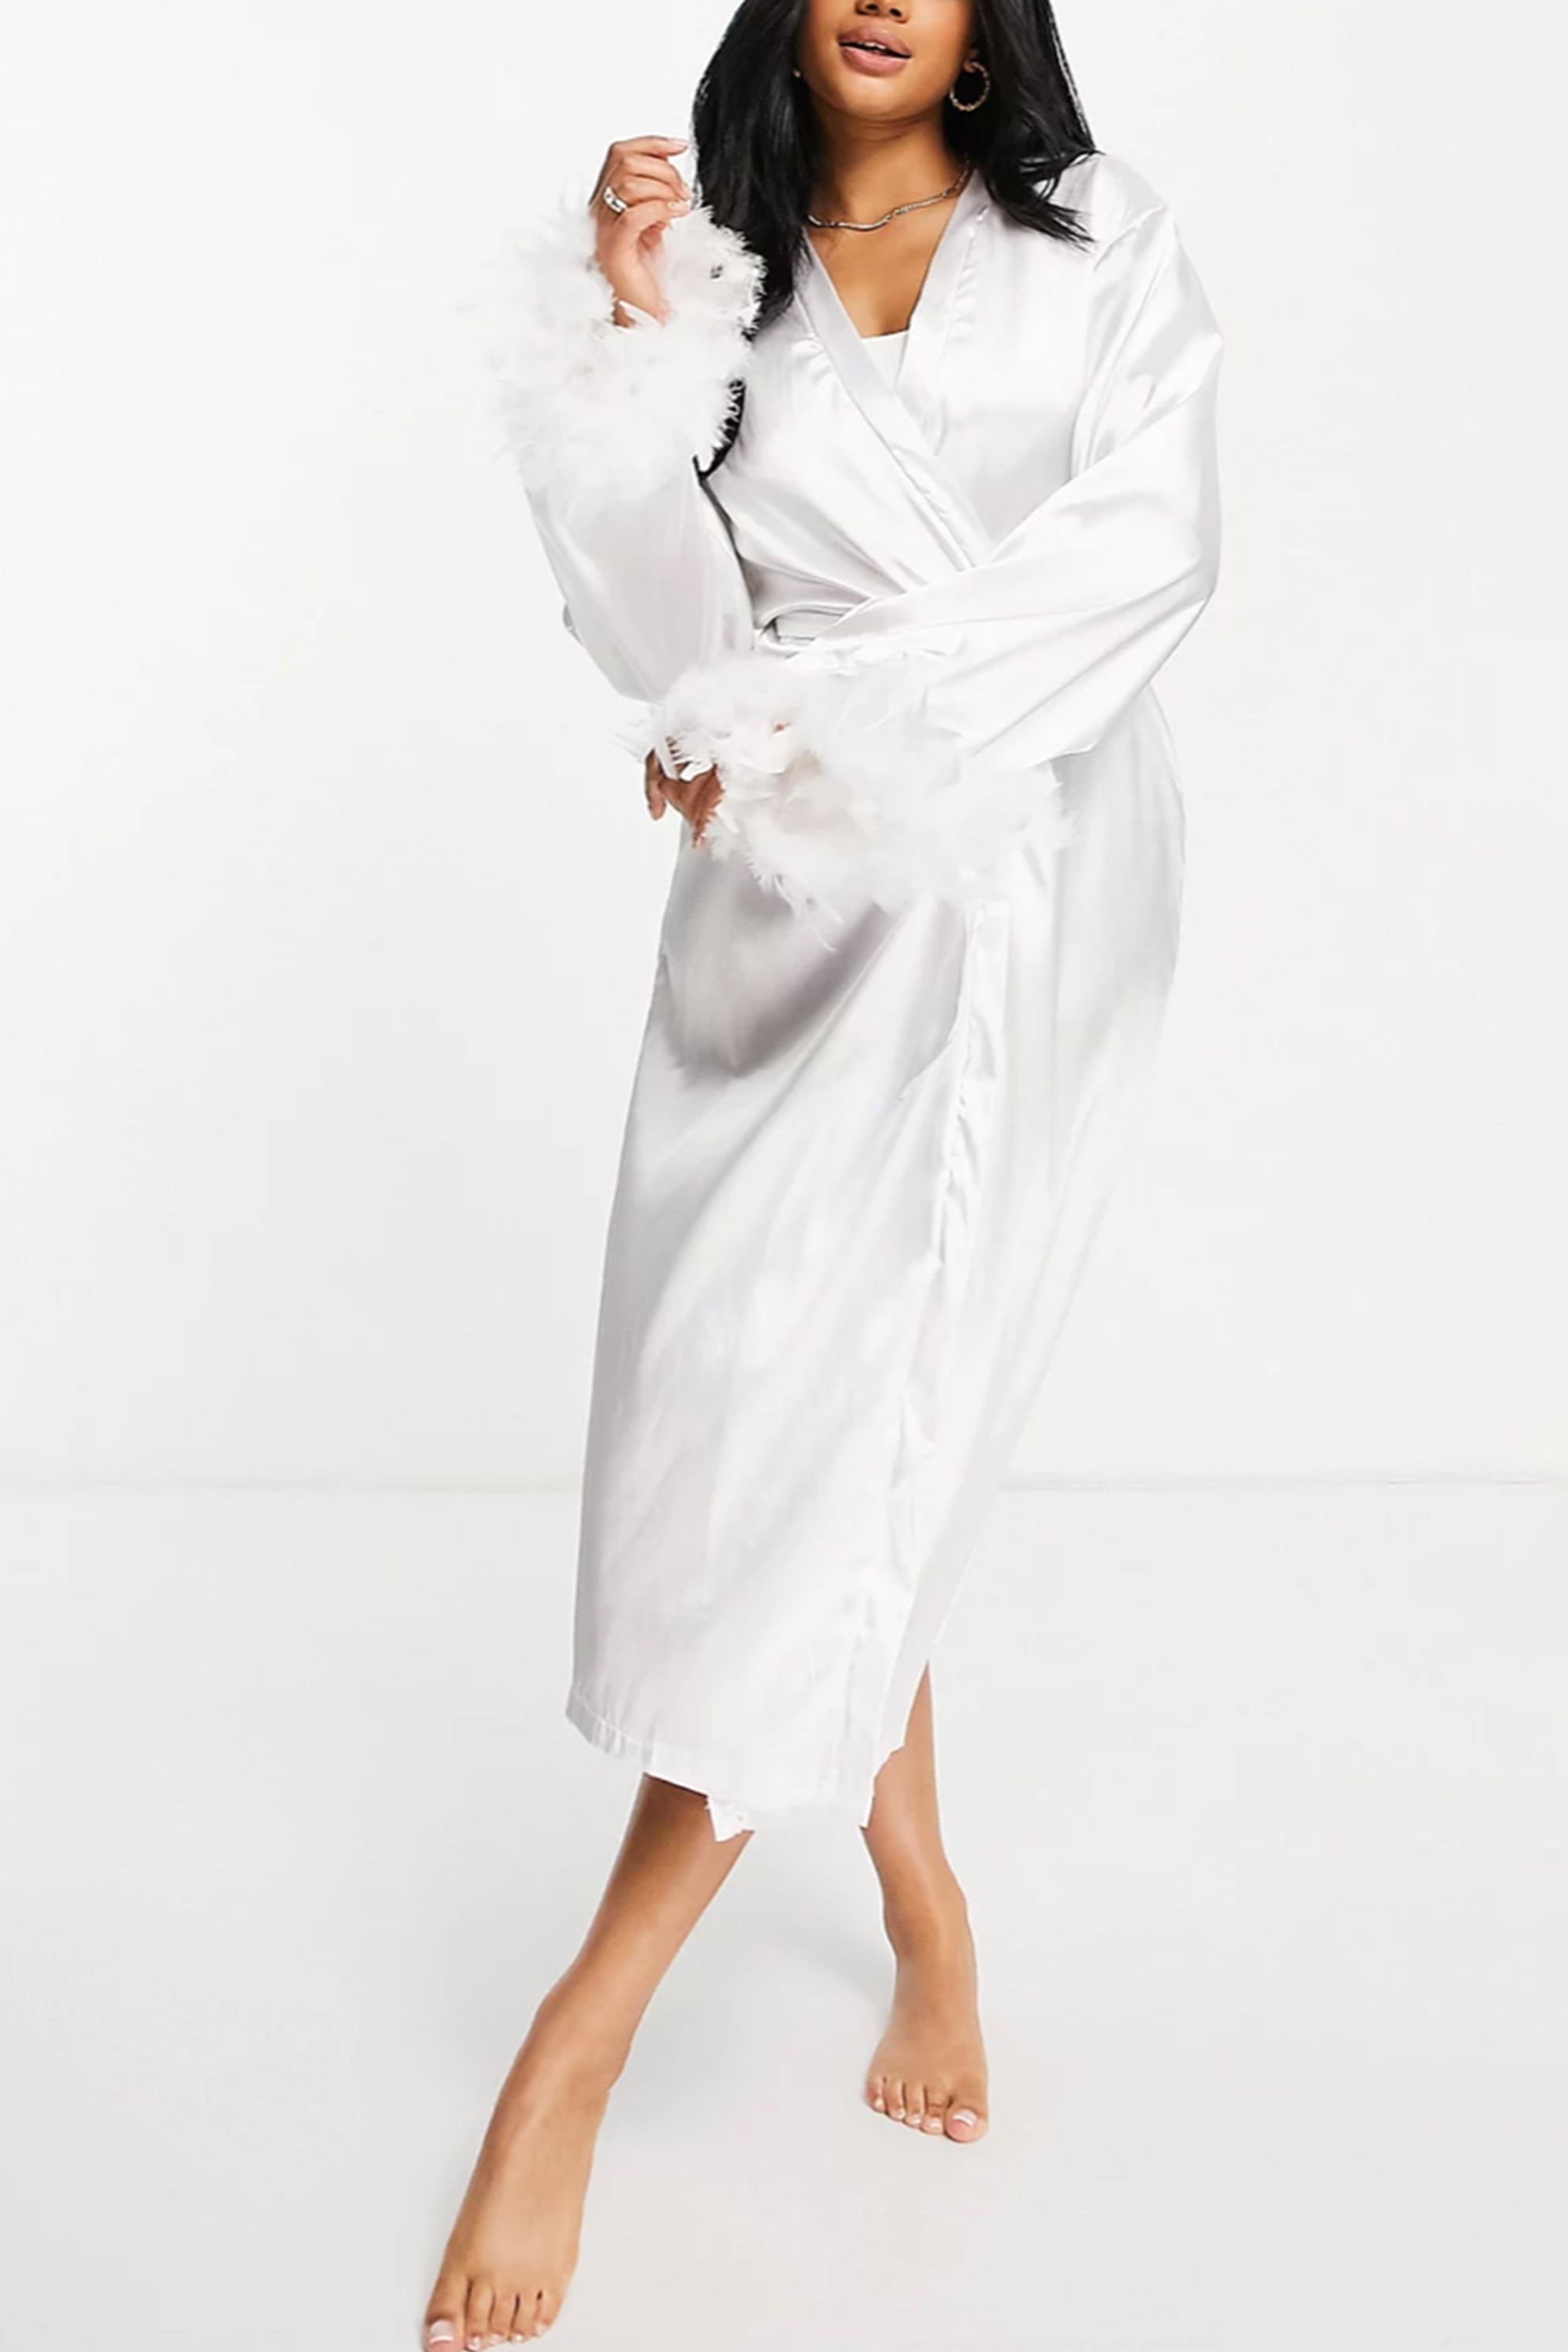 Aggregate more than 68 white satin dressing gown